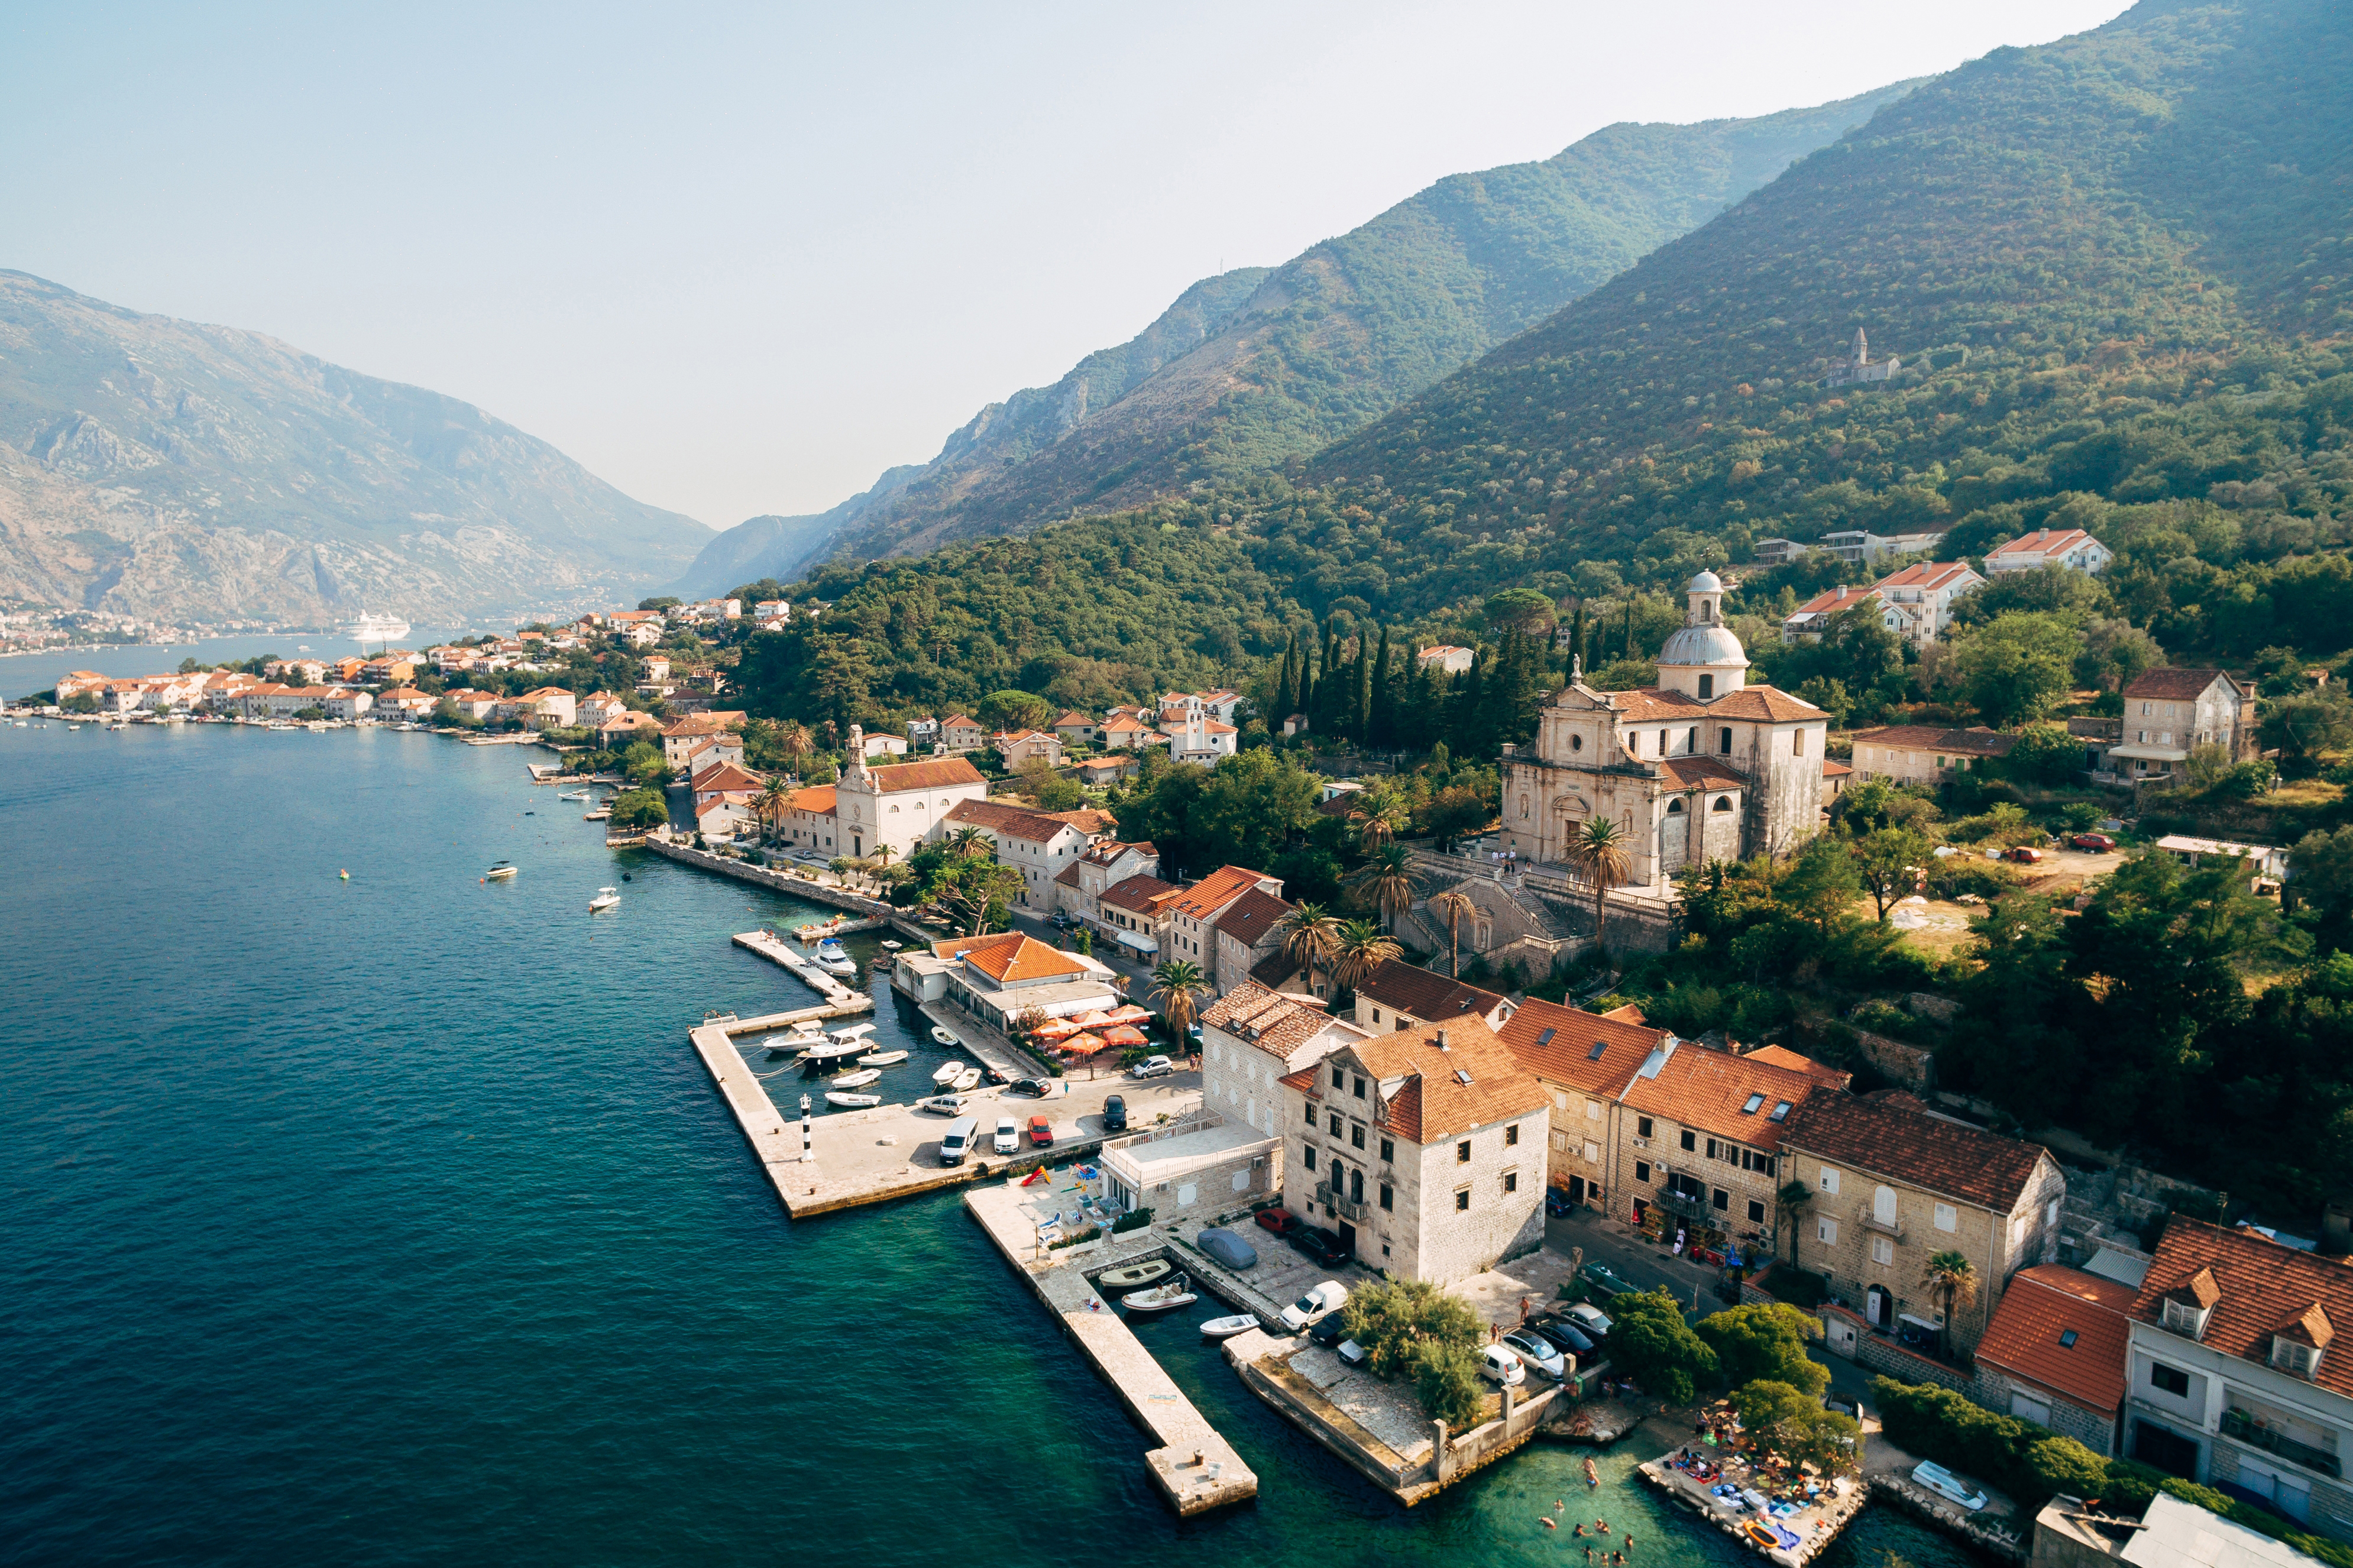 Kotor is a city where Russians can get education in Montenegro